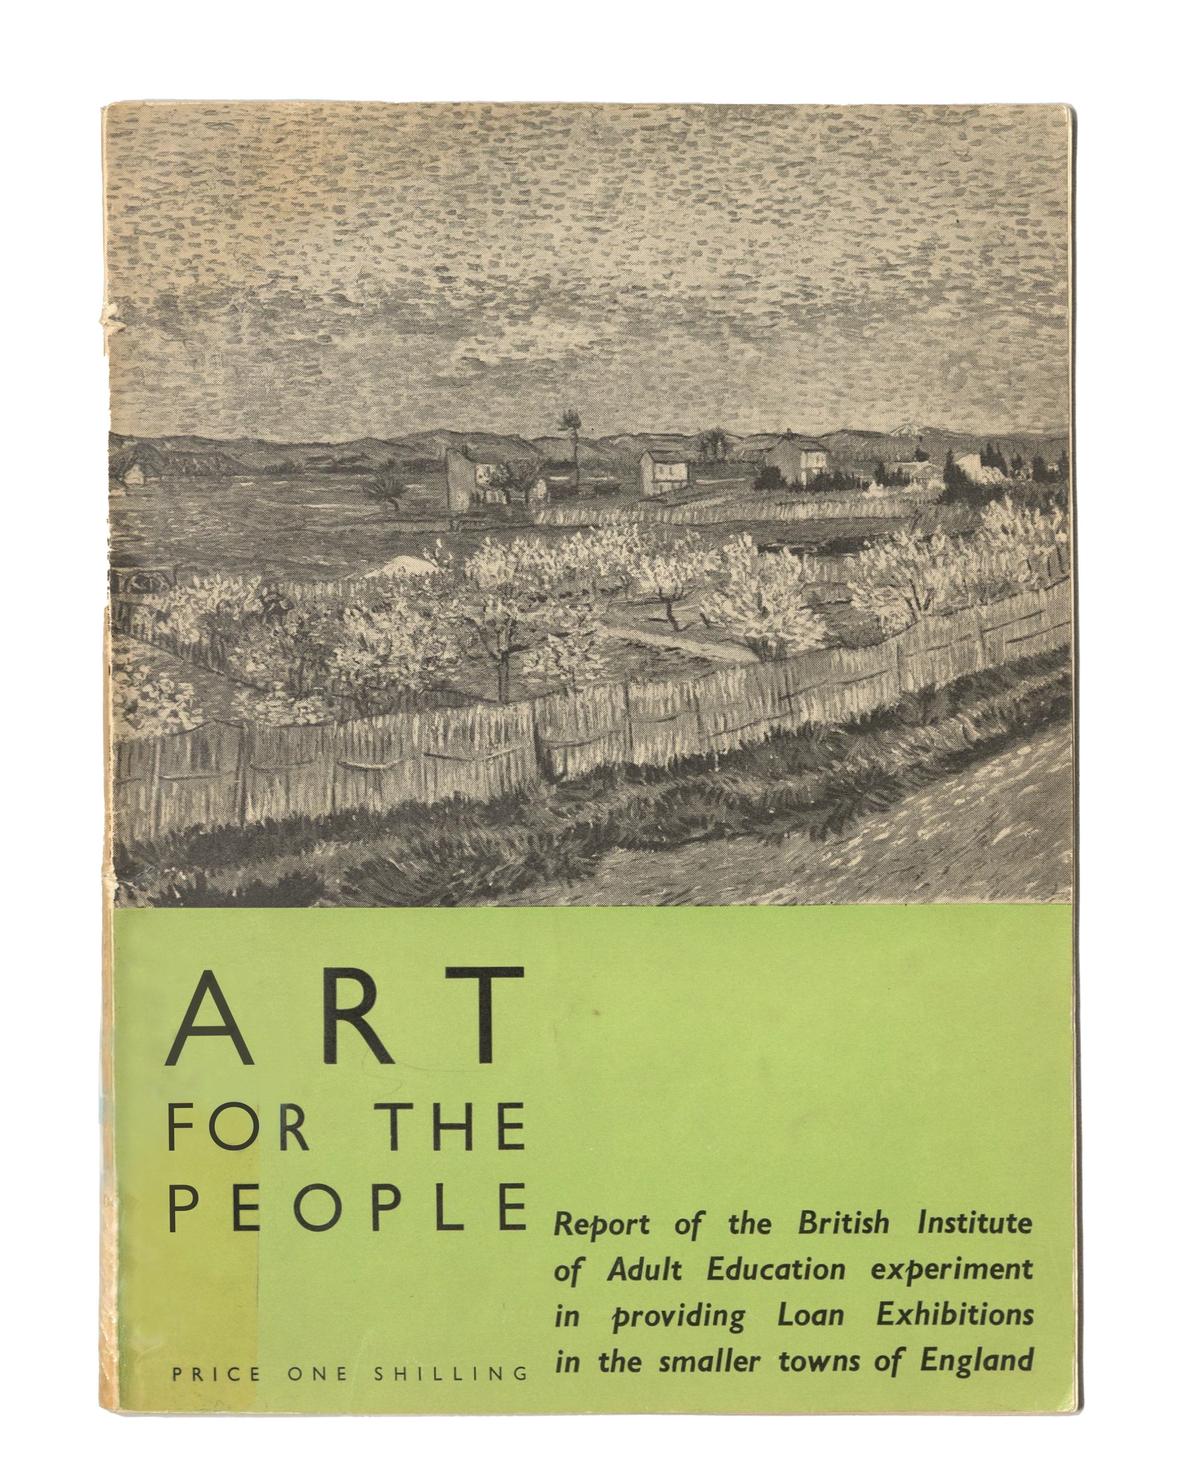 Art for the People, the cover of a report on loan exhibitions in the smaller towns of England (1935) Courtesy of Tate, London